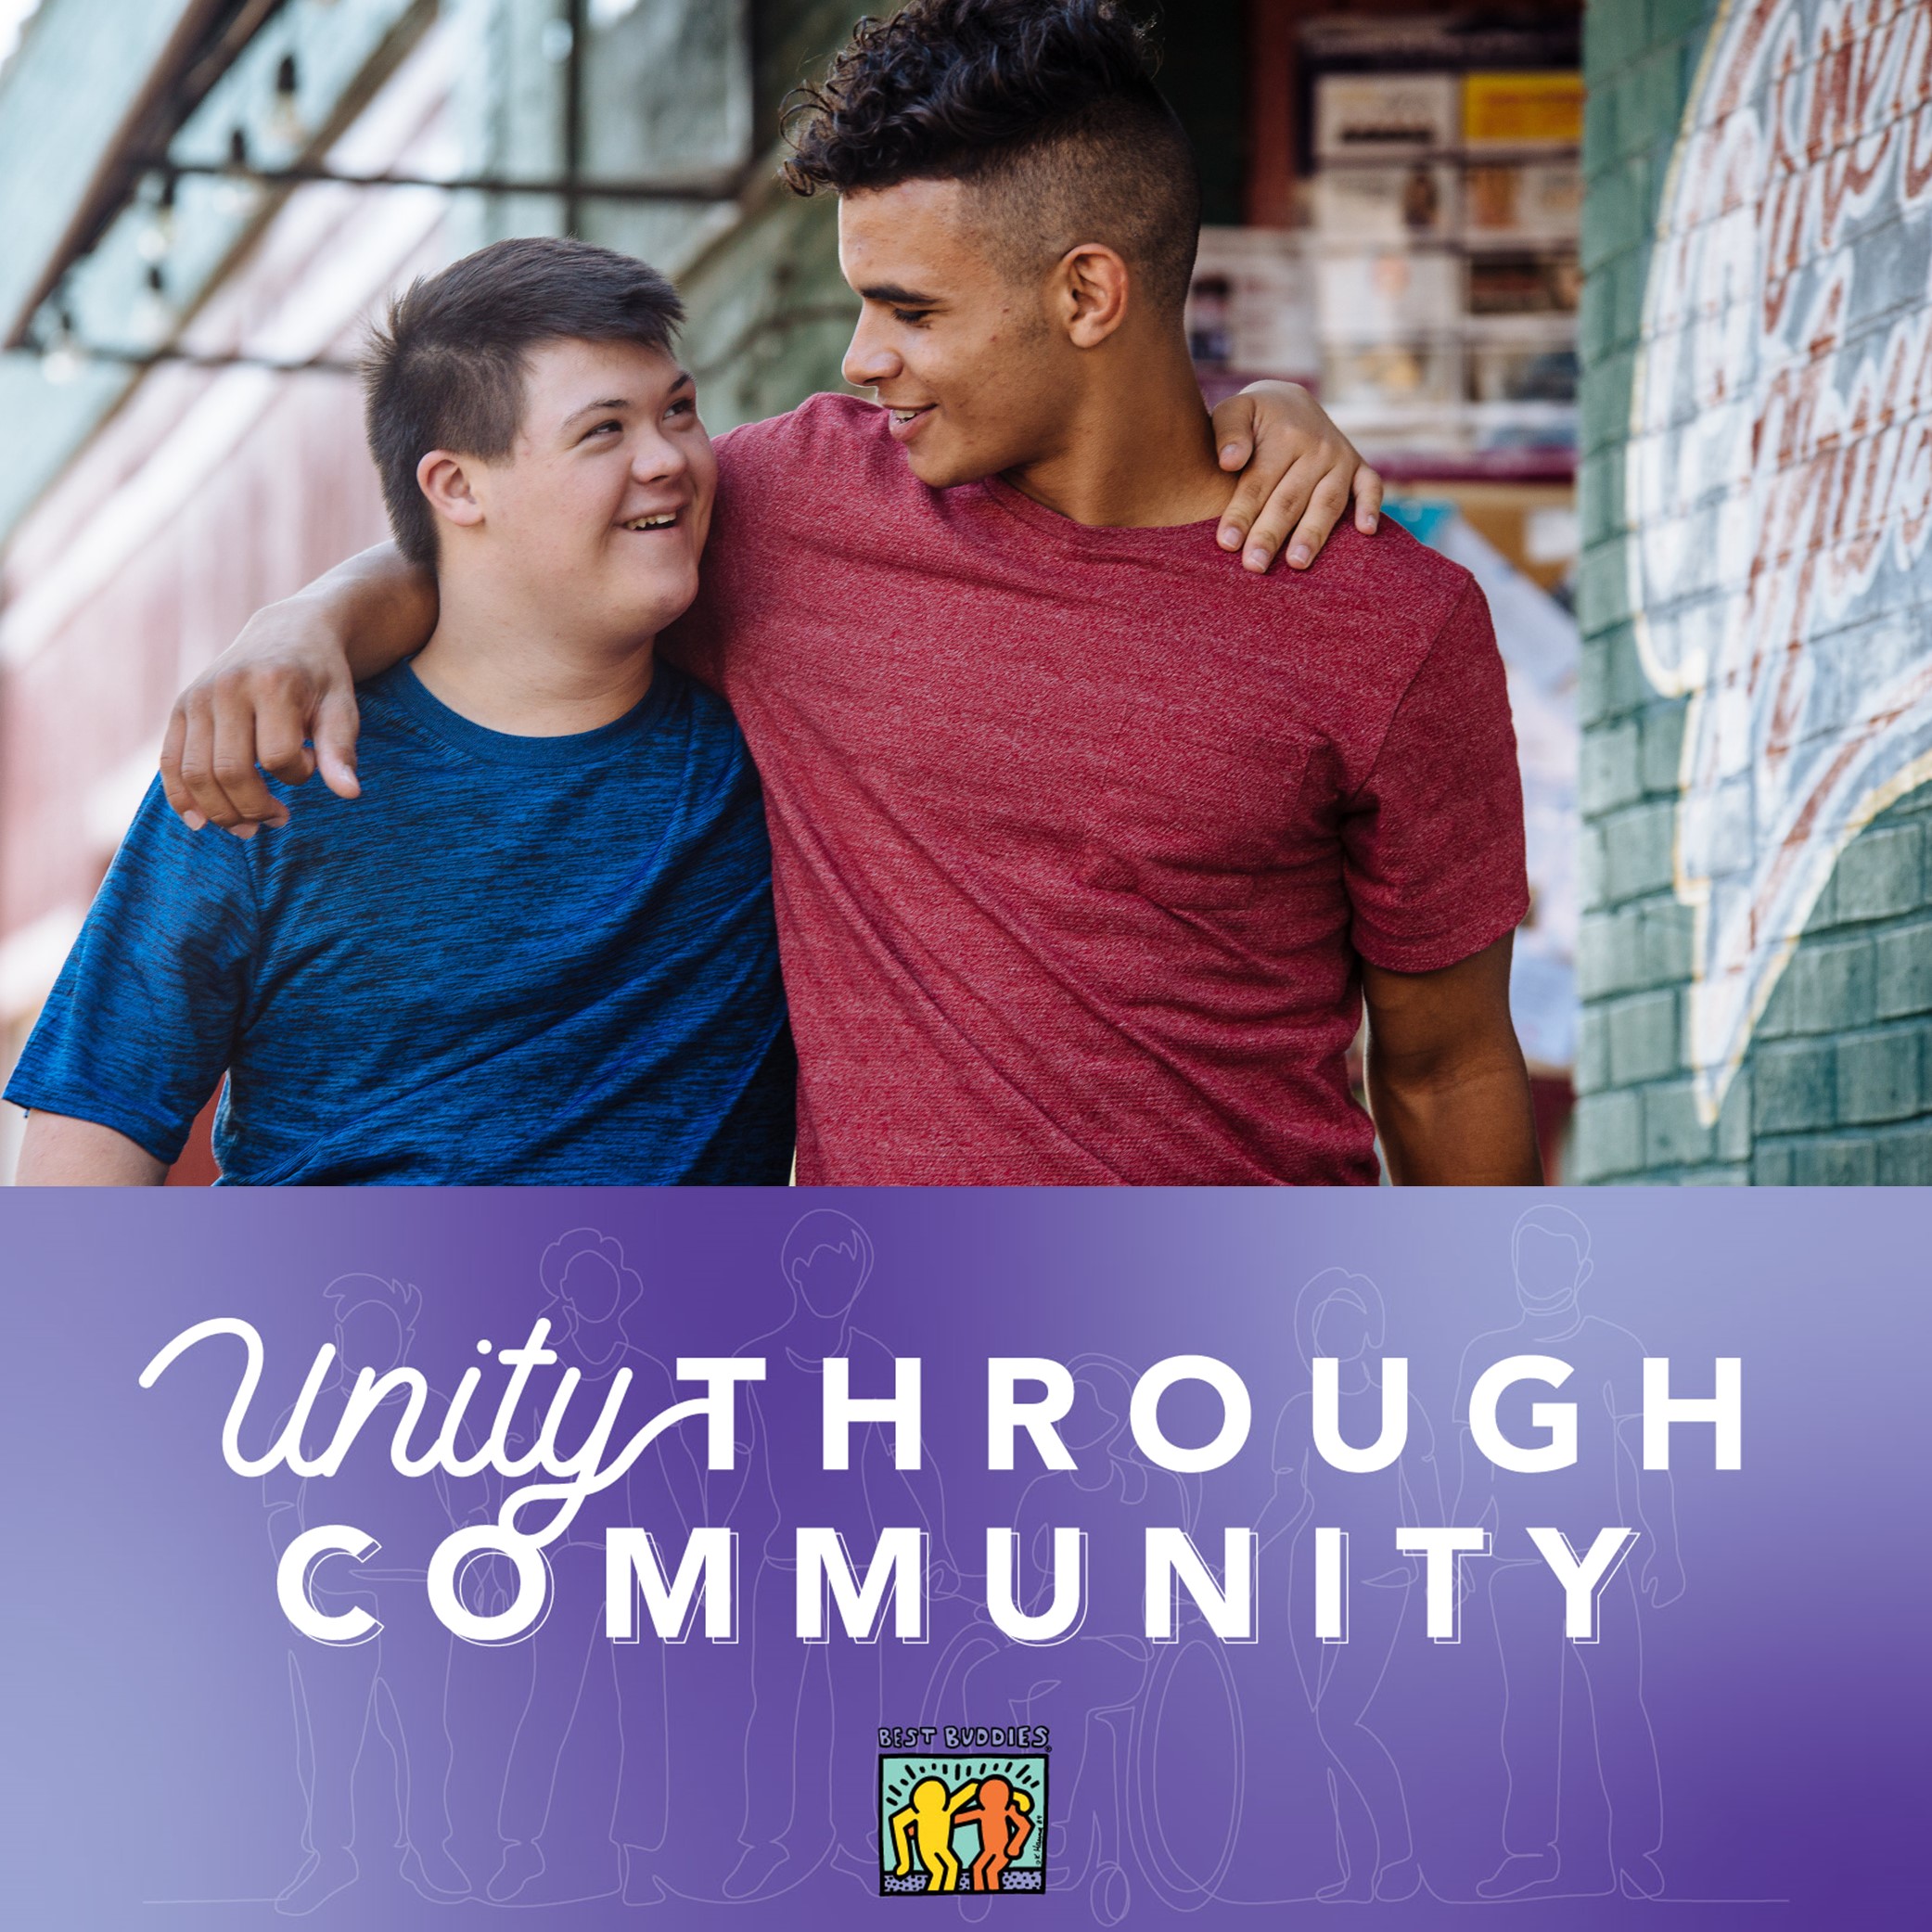 Two male Best Buddies Friendship participants are smiling and hugging each other.